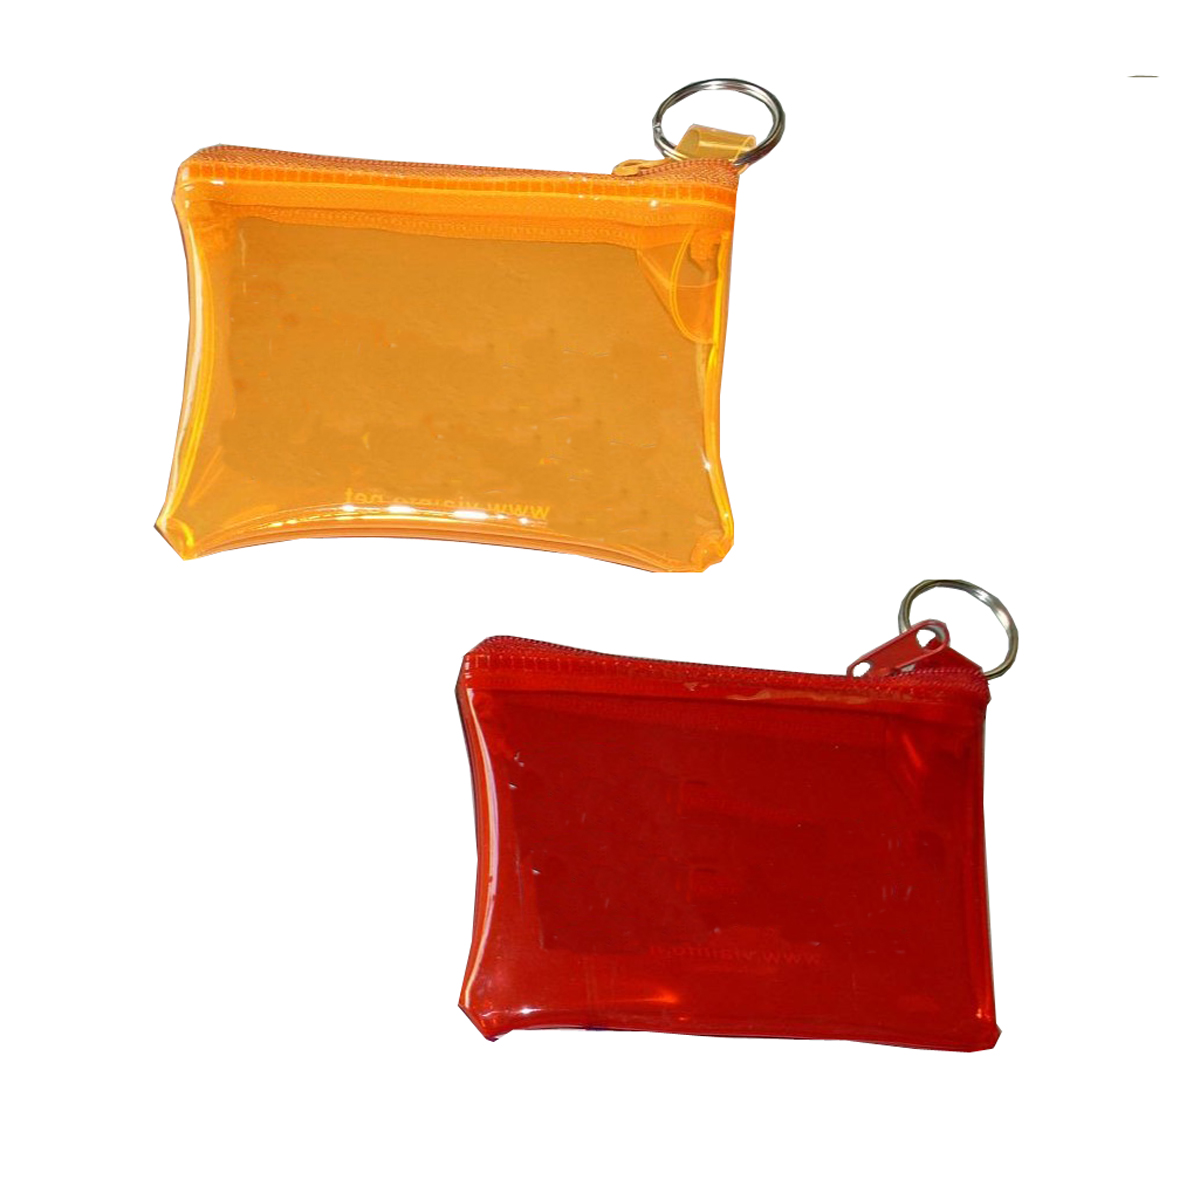 GL-AAD1047 Translucent PVC Coin Purse with Key Ring